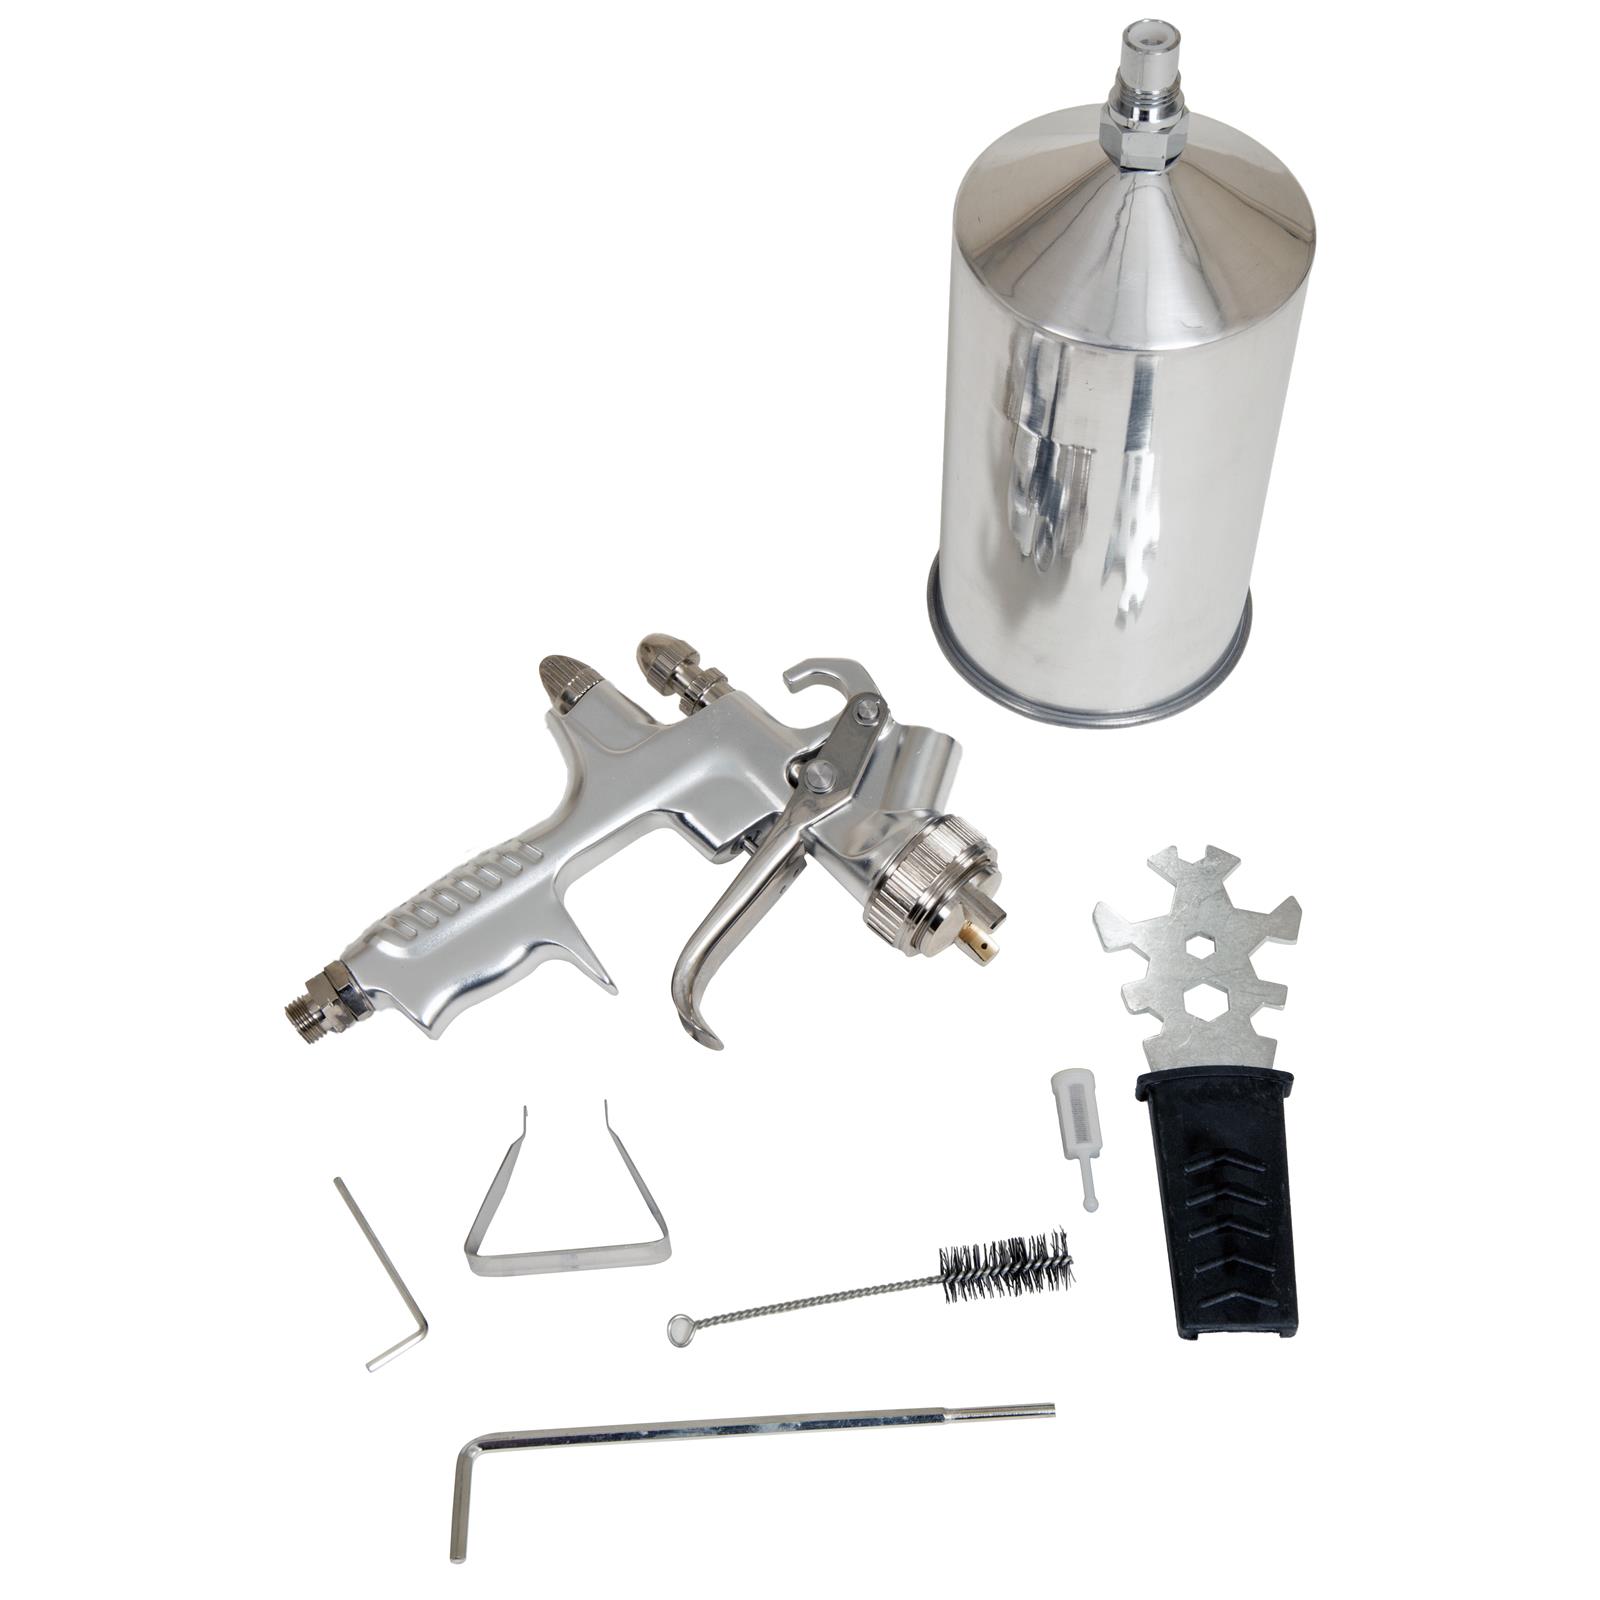 Paint Spray Gun LVLP Polished Aluminum Gravity Feed 1.4 mm Nozzle 1000 ml Cup